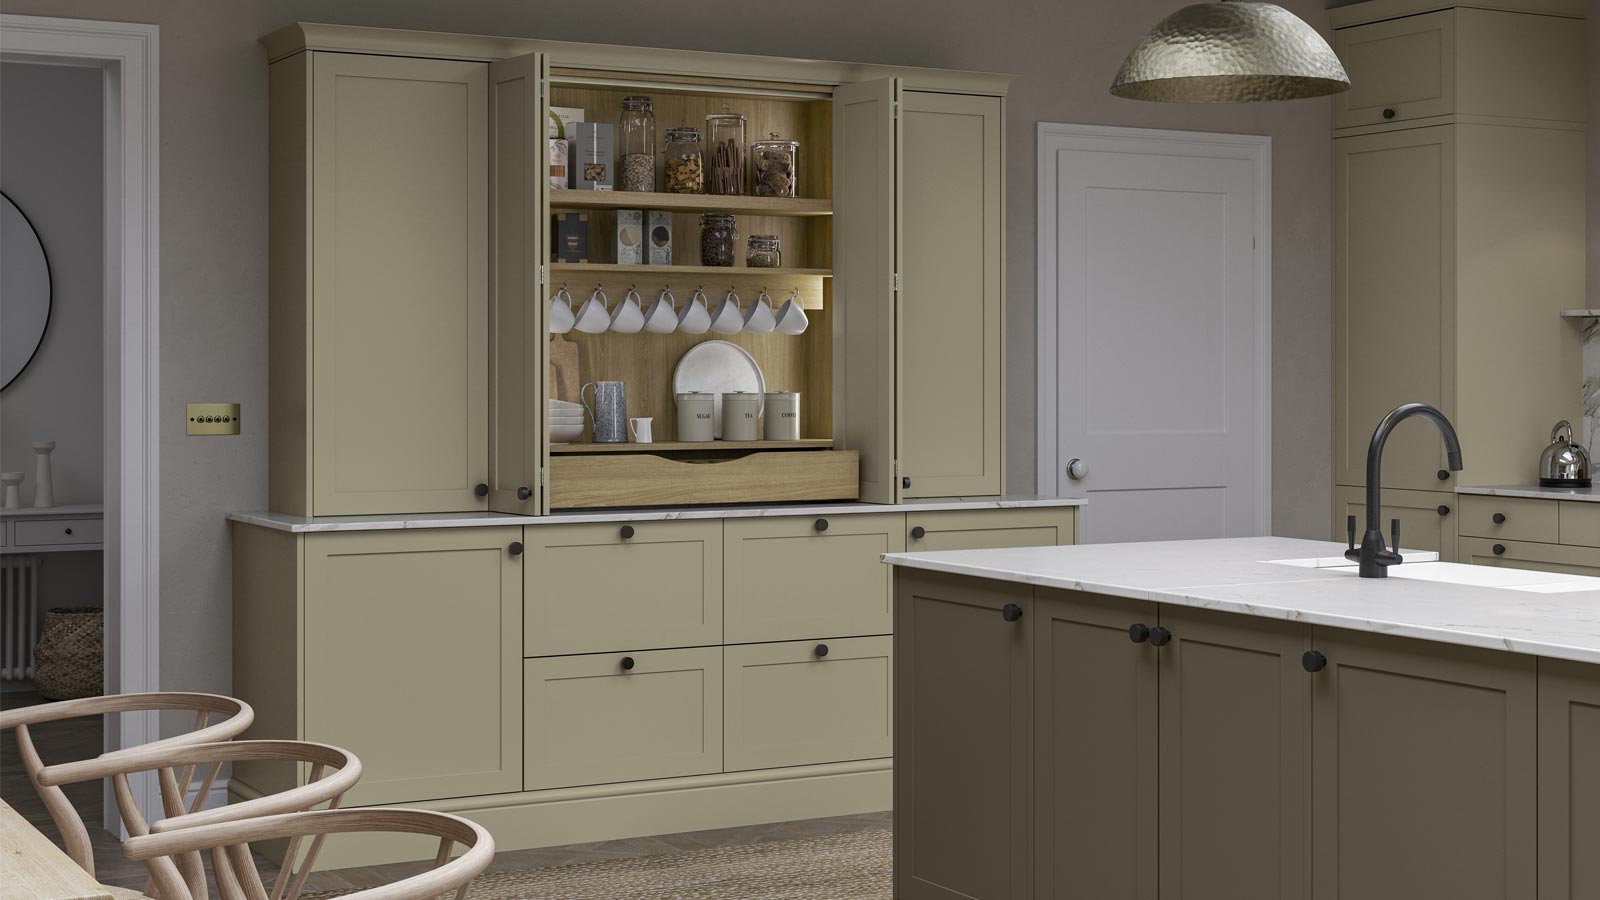 A breakfast station and coffee bar cabinet with Shaker doors